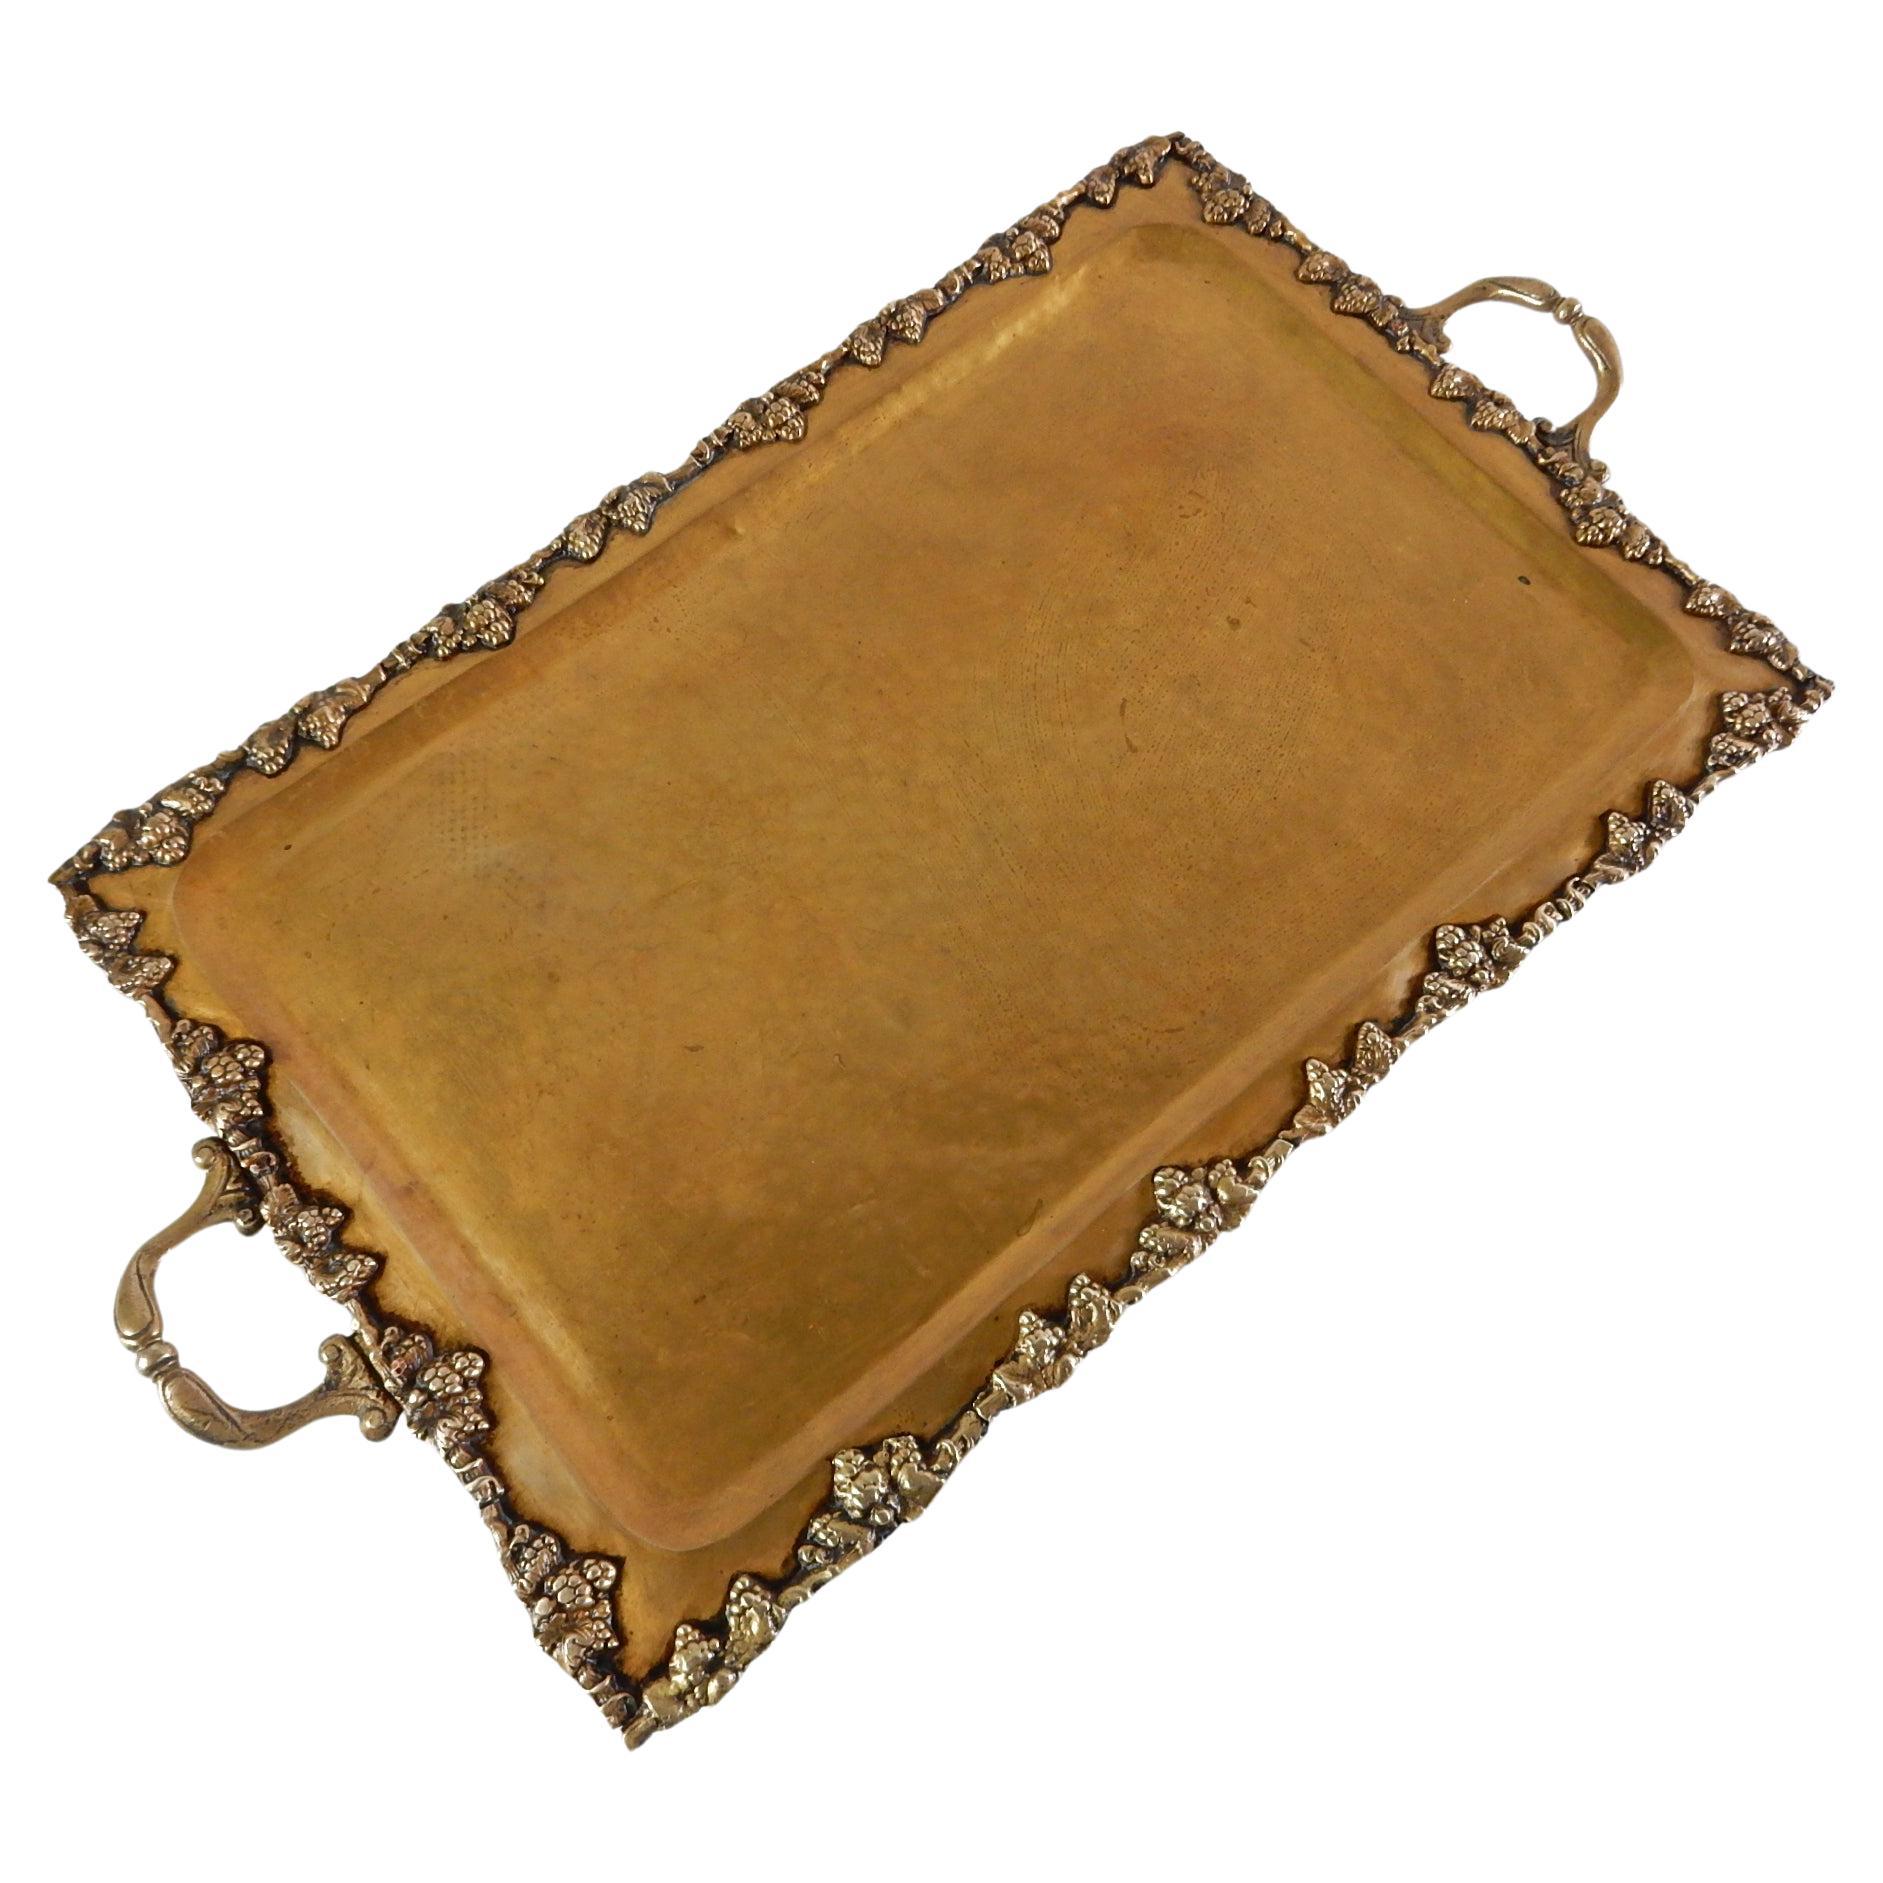 Exceptional brass handled footed tray for service or use for bar.
Hammered tray with grapevine trimmed edge.
Large piece measuring 31in long x 17in wide x 2in tall.
Warm aged patina throughout. It's fabulous!
Shipped within 48 hours or purchase.